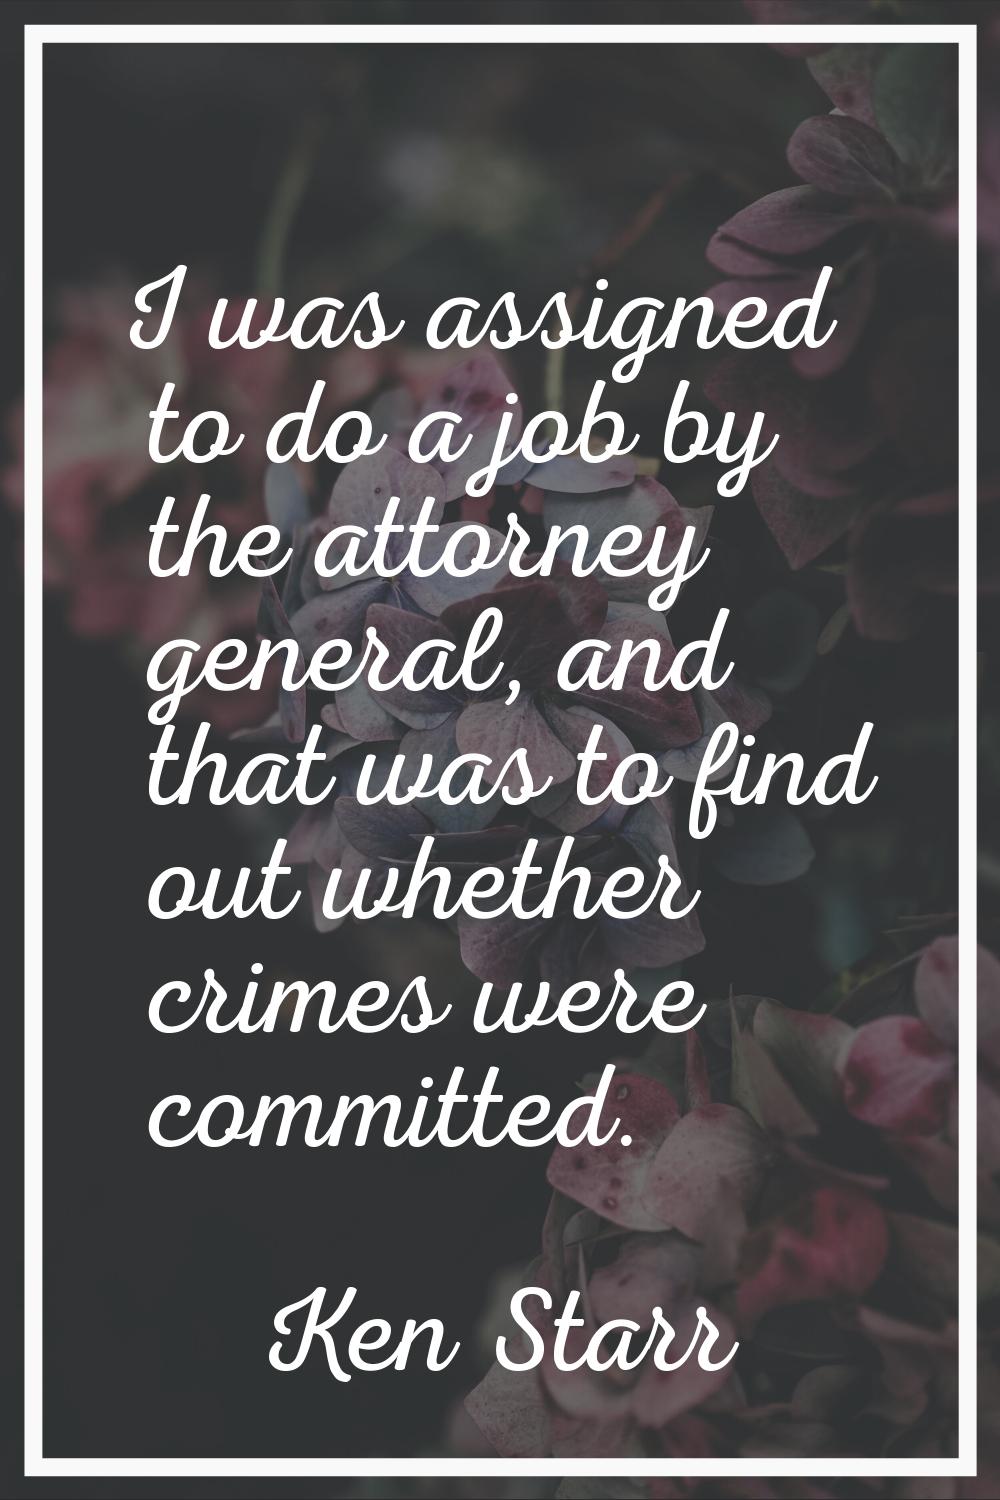 I was assigned to do a job by the attorney general, and that was to find out whether crimes were co